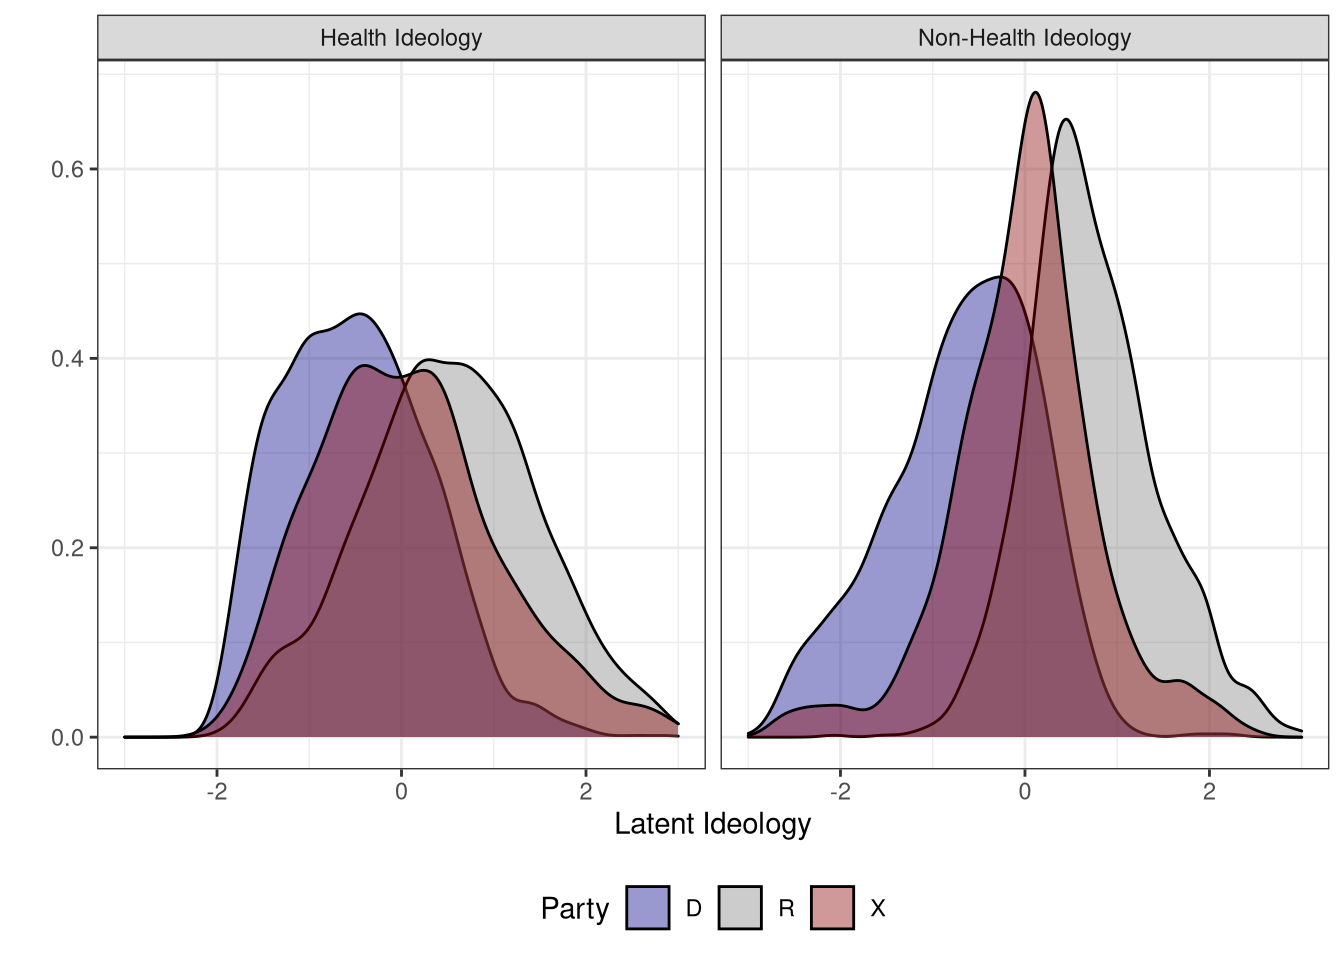 Health and Non-health latent ideology by 3-category party identification